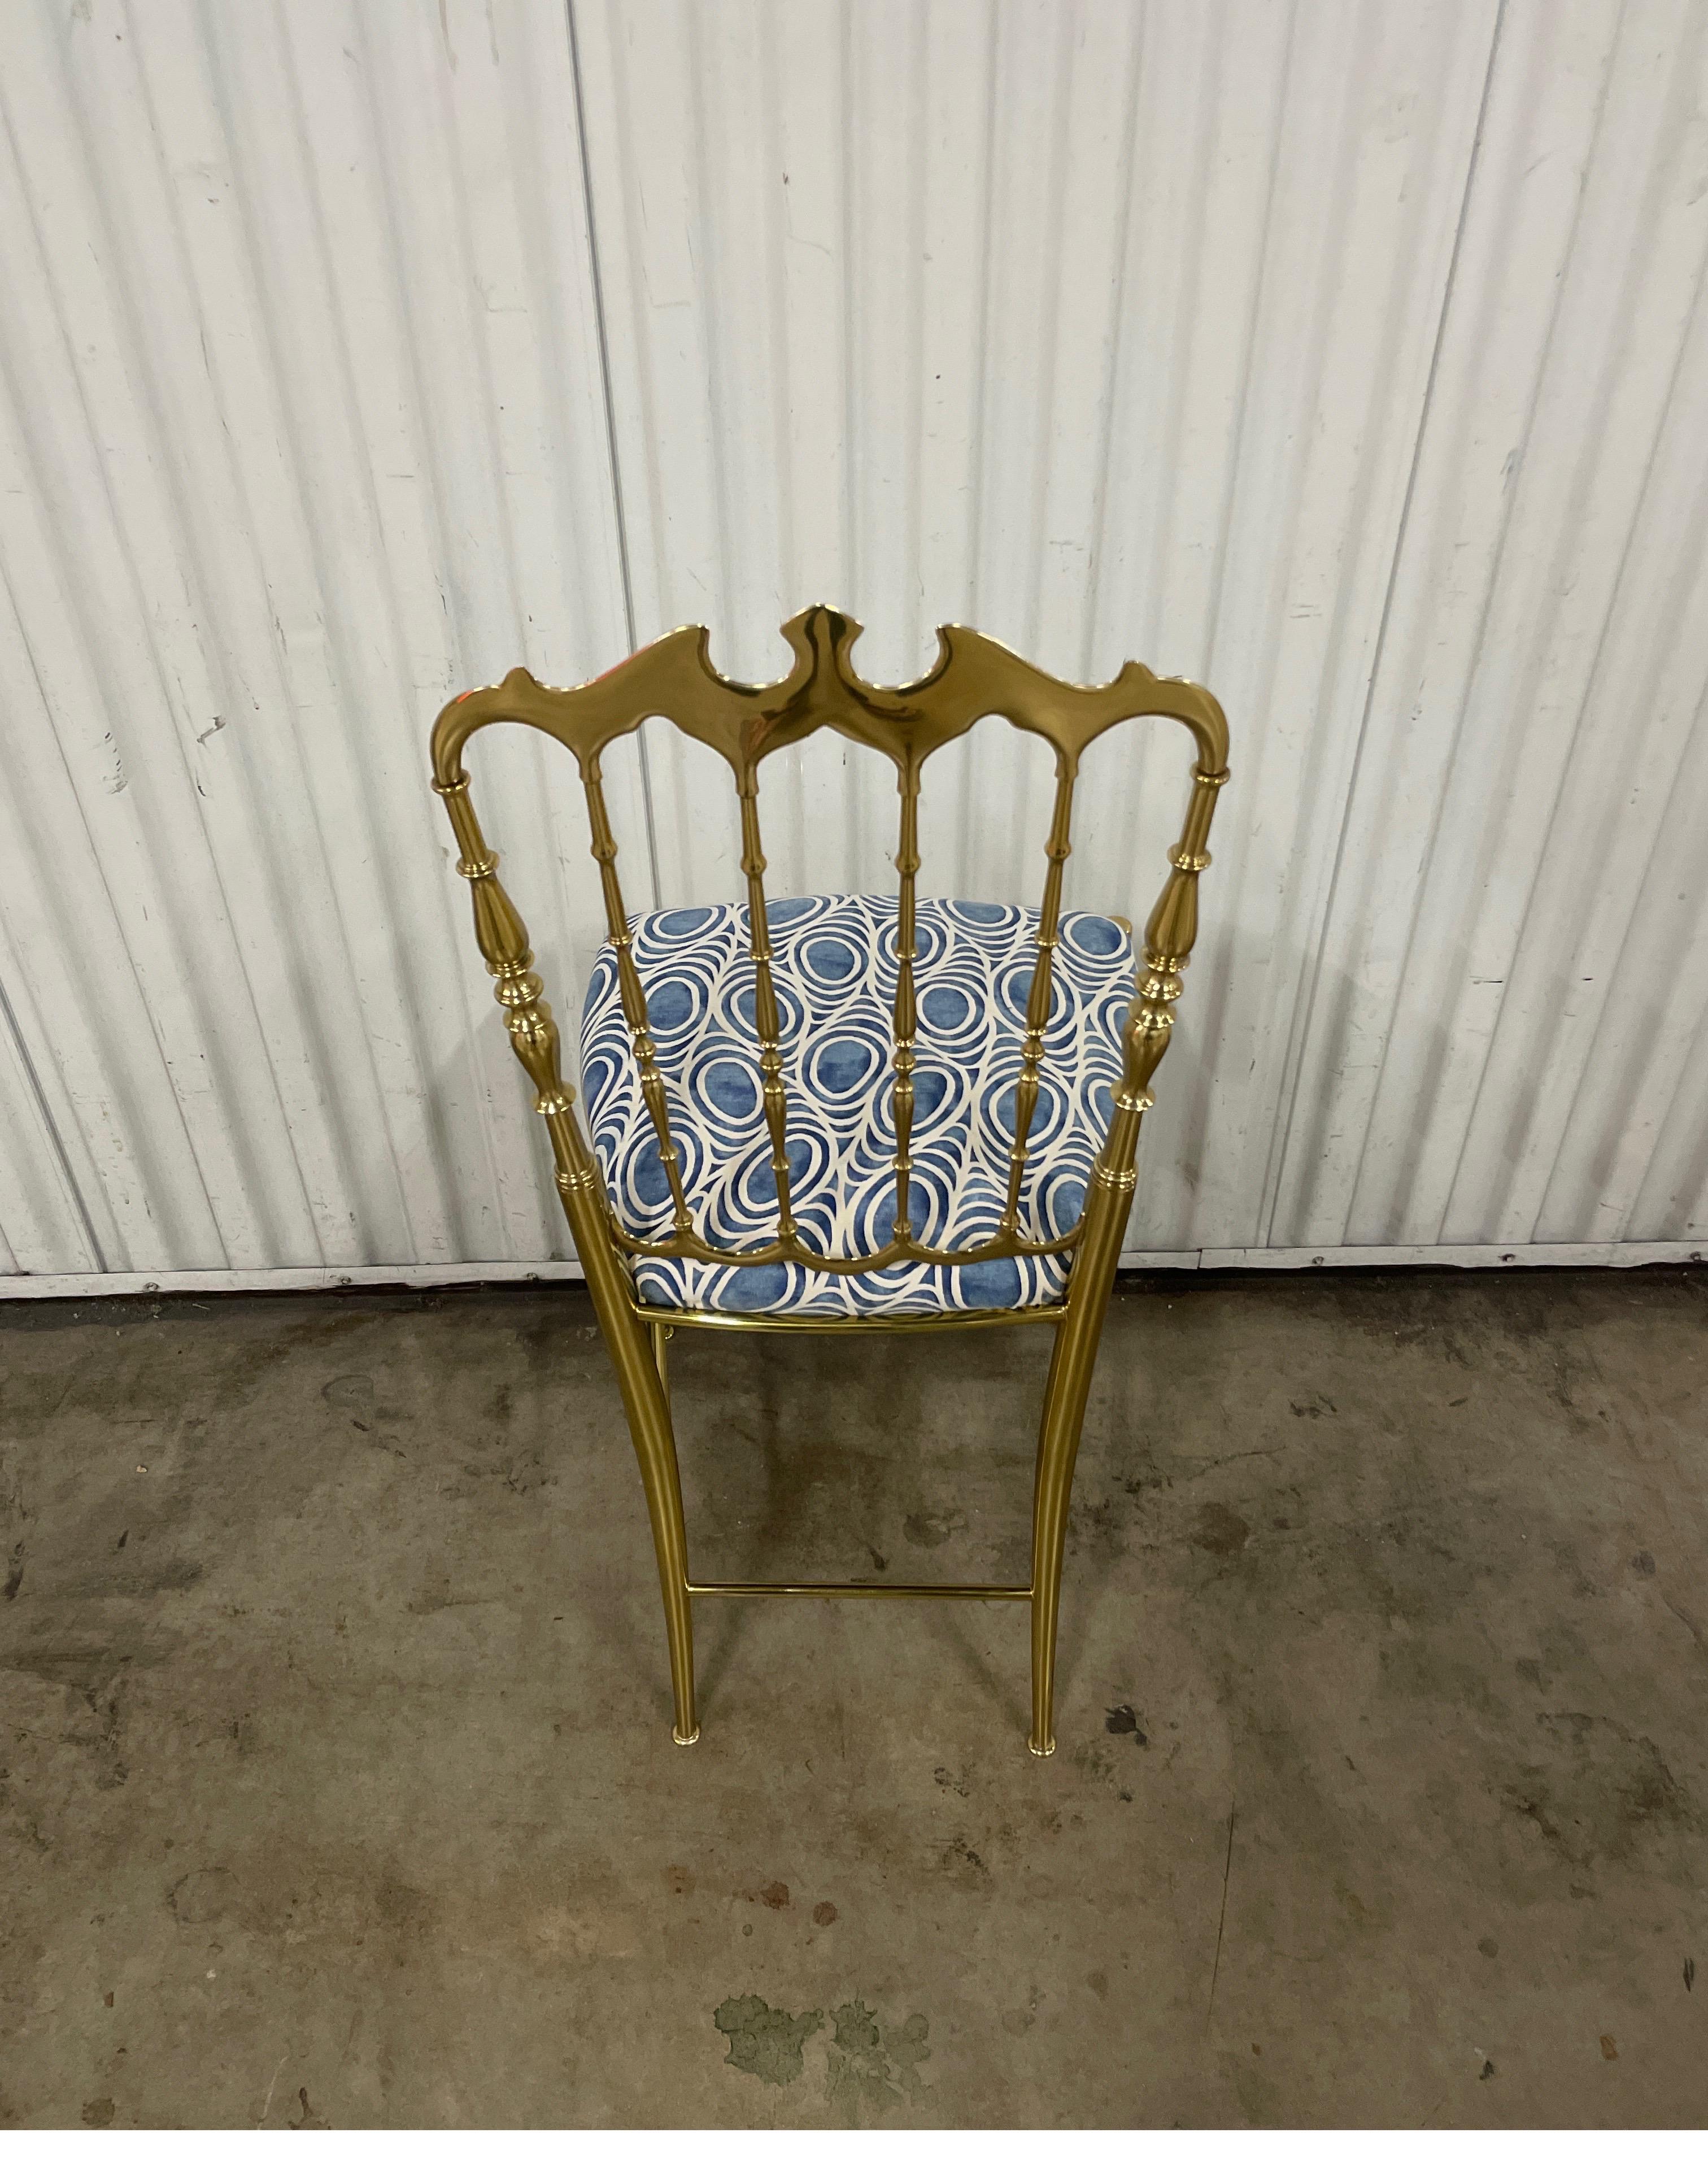 20th Century Vintage Solid Brass Italian Chiavari Chair with Fortuny Seat Covering For Sale